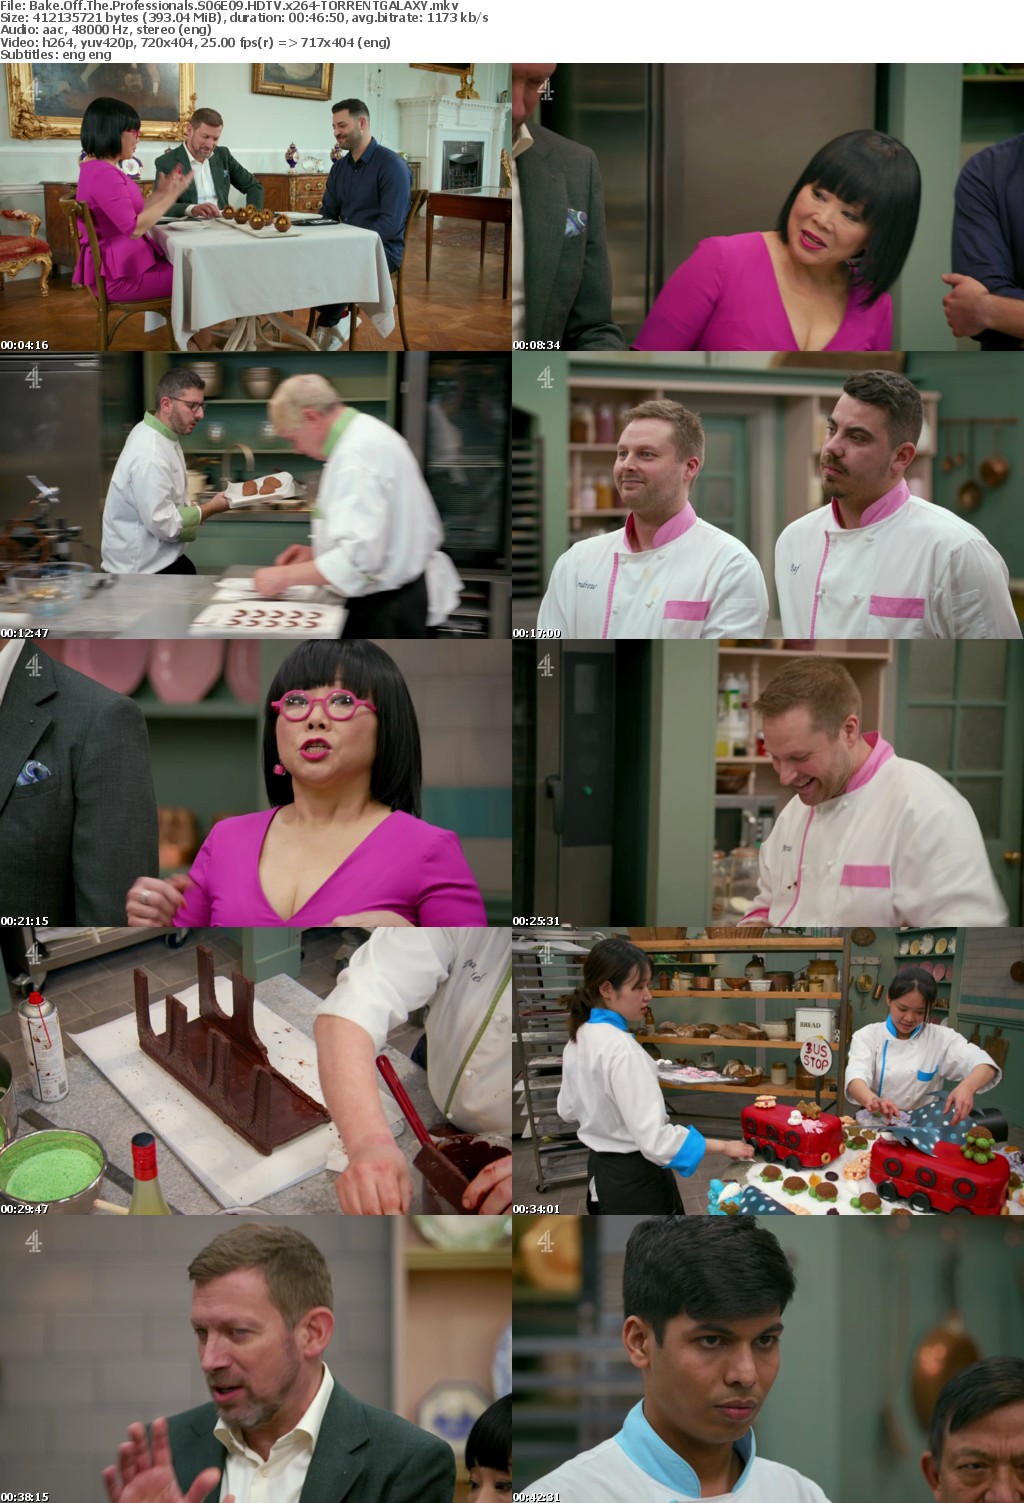 Bake Off The Professionals S06E09 HDTV x264-GALAXY